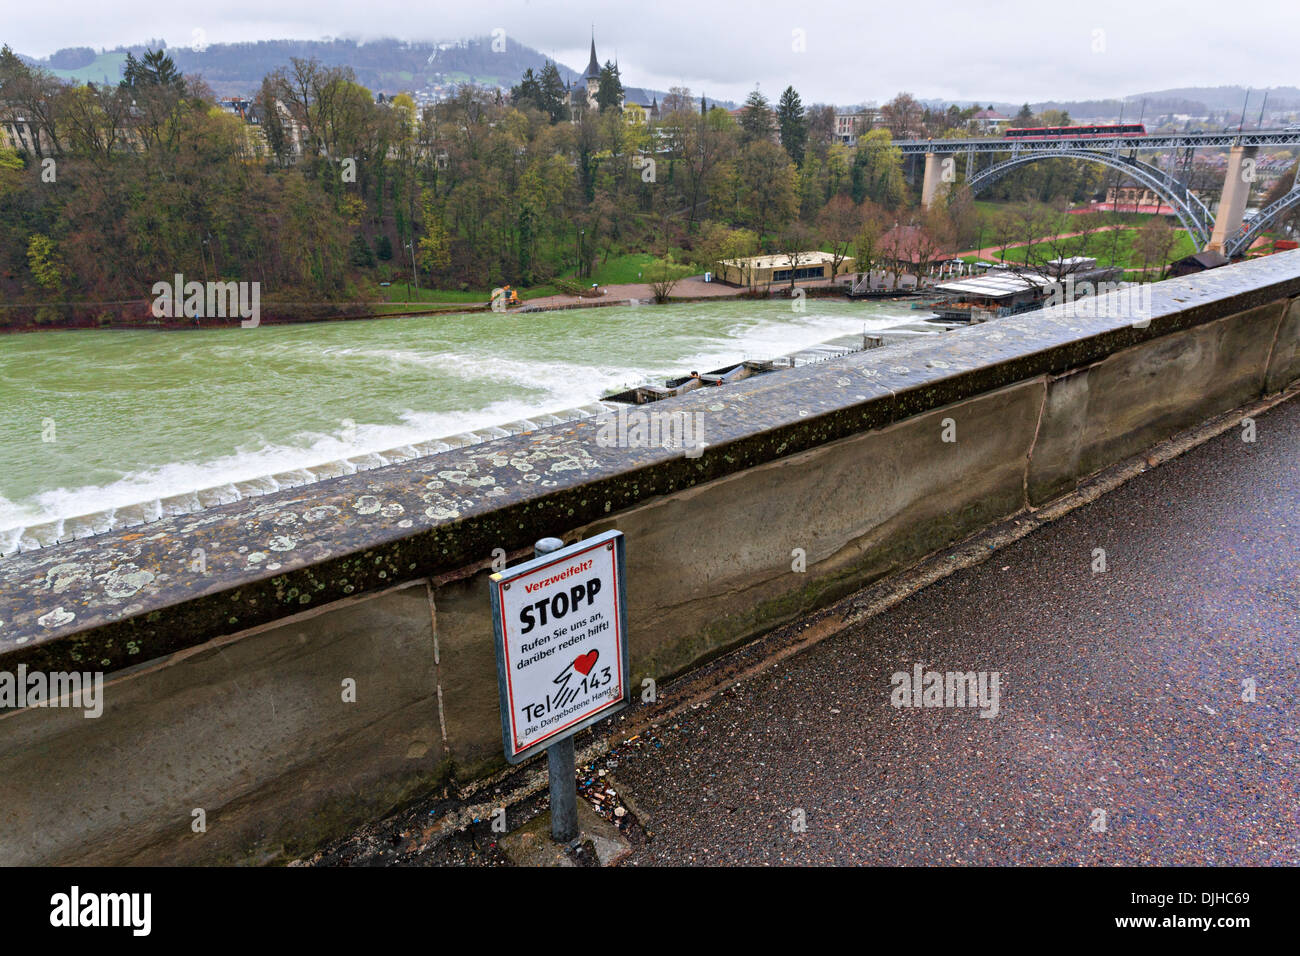 Suicide prevention sign at the Aare River, Bern Switzerland Stock Photo